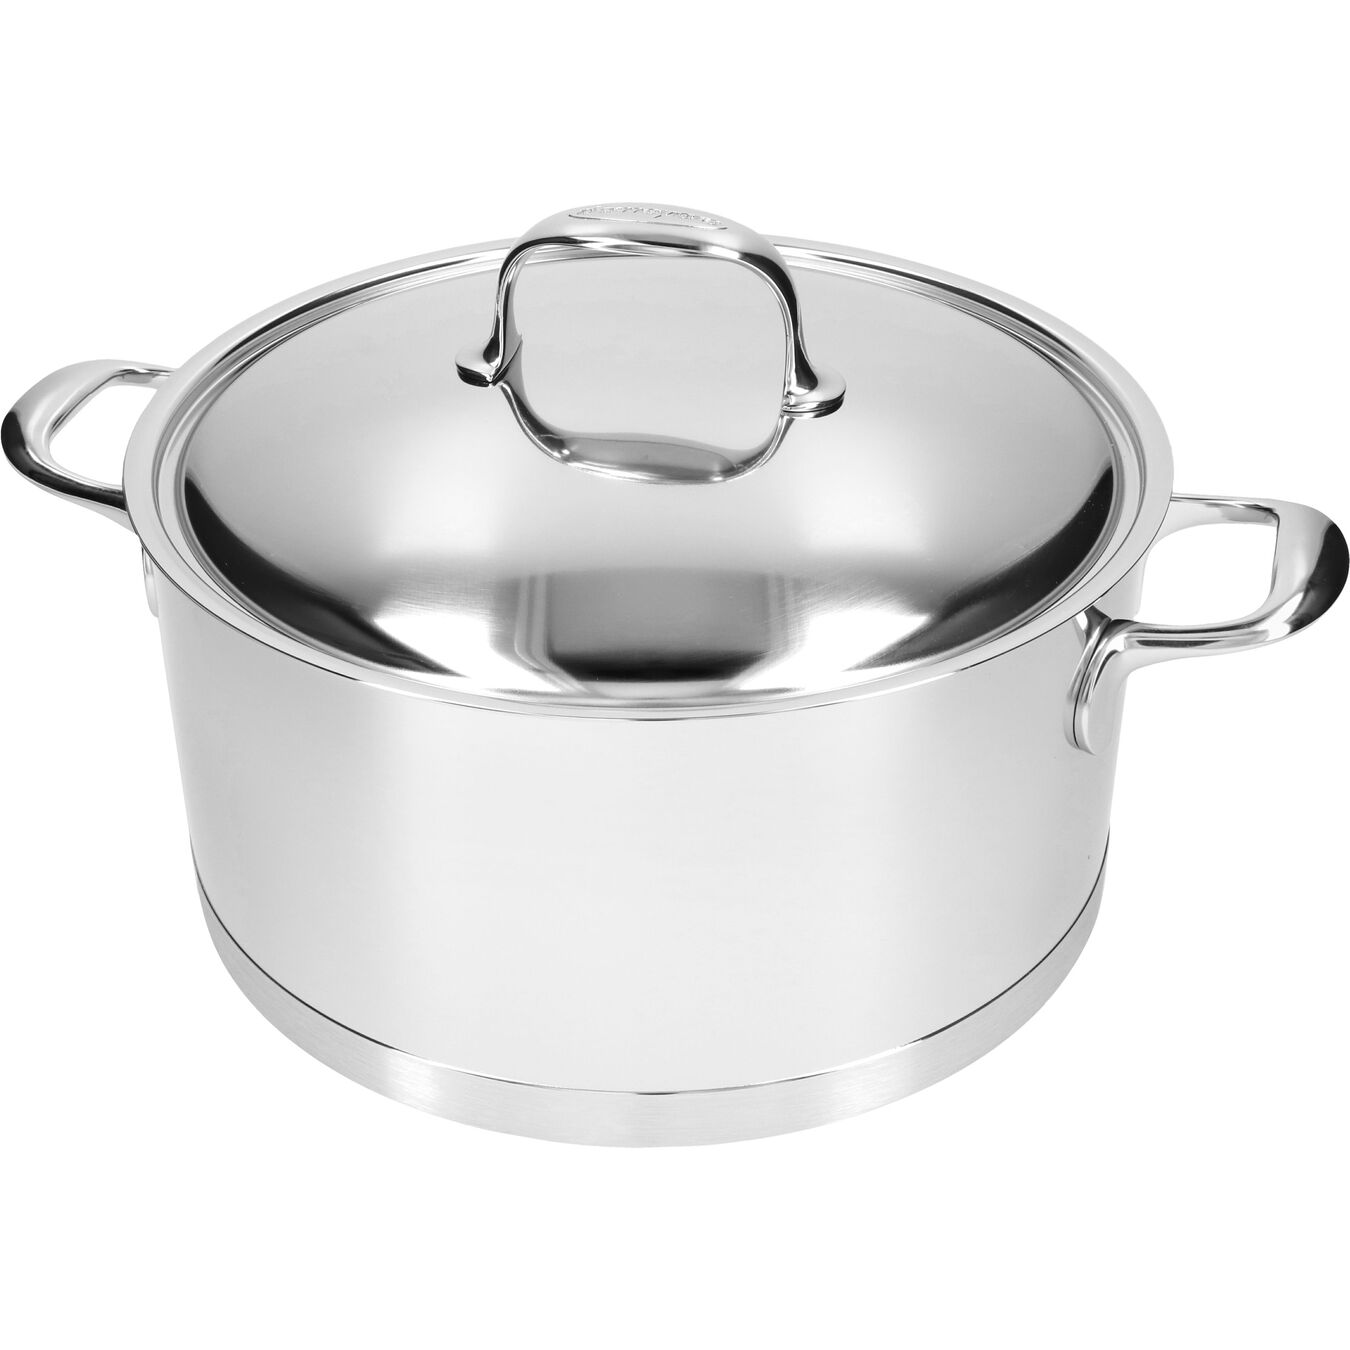 8.75 qt, 18/10 Stainless Steel, Dutch Oven with Lid,,large 6